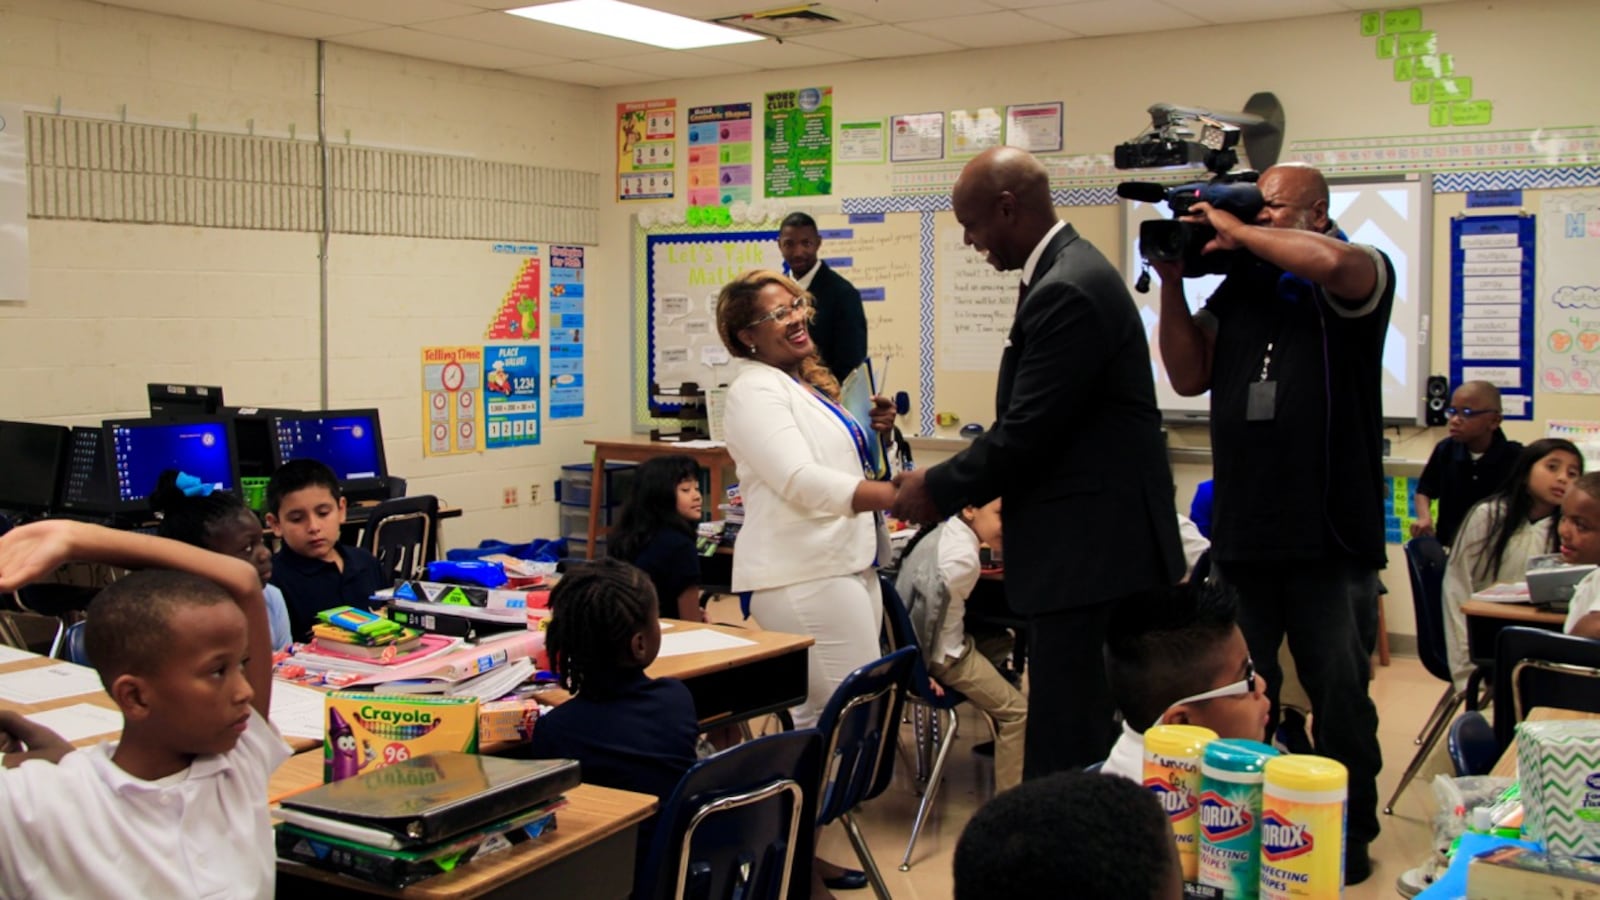 Superintendent Dorsey Hopson greets a third-grade teacher on the first day of school at Bruce Elementary School in Memphis.